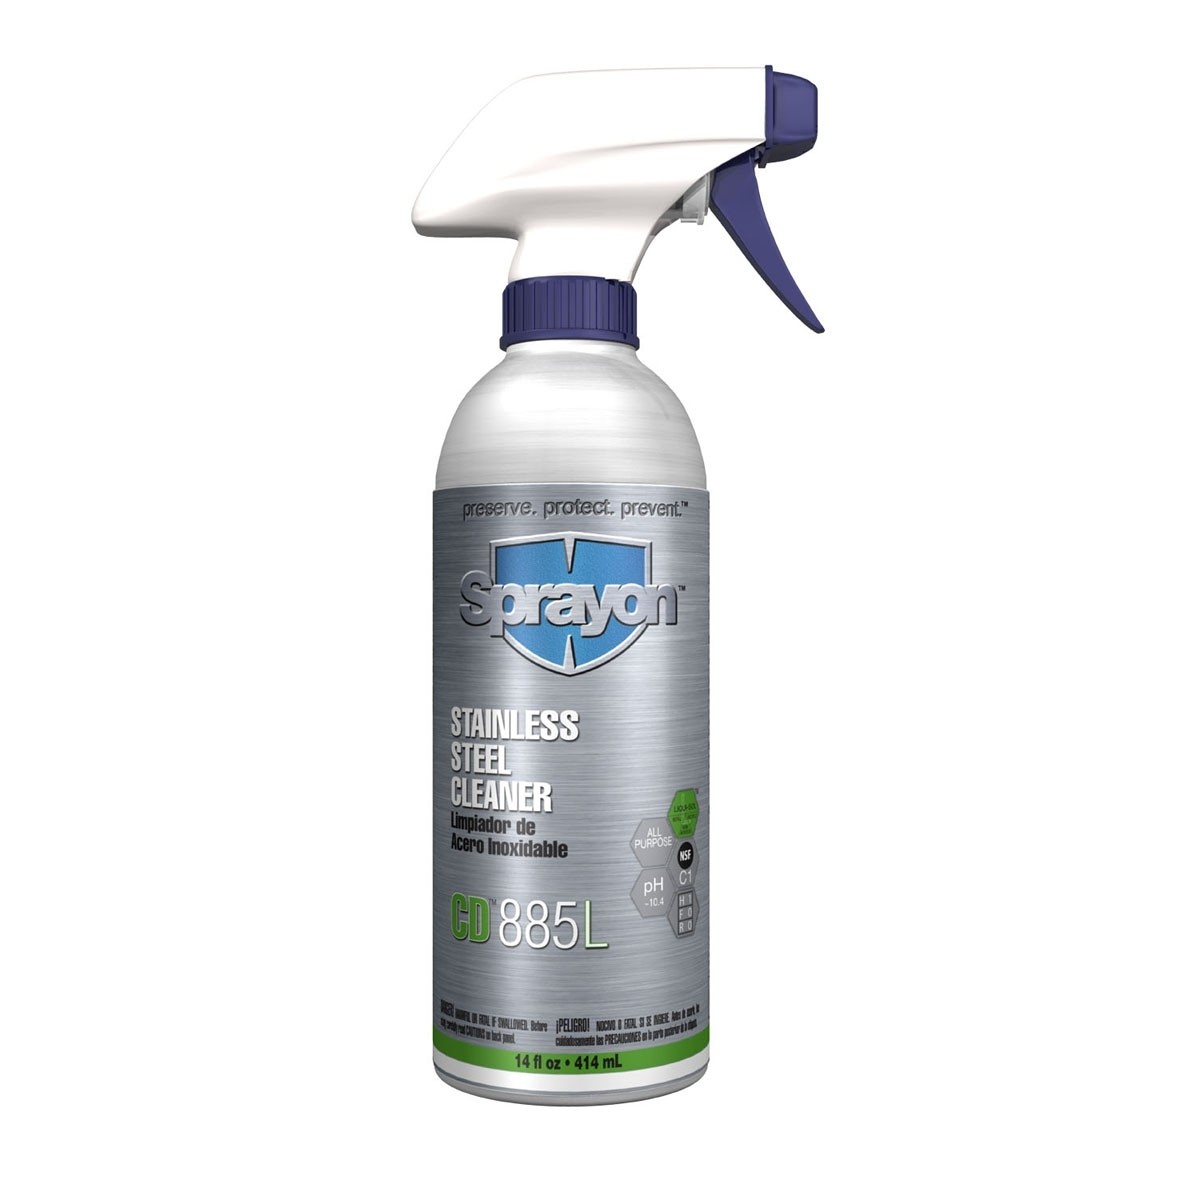 Buy cold spray and silicone spray for stainless steel surfaces